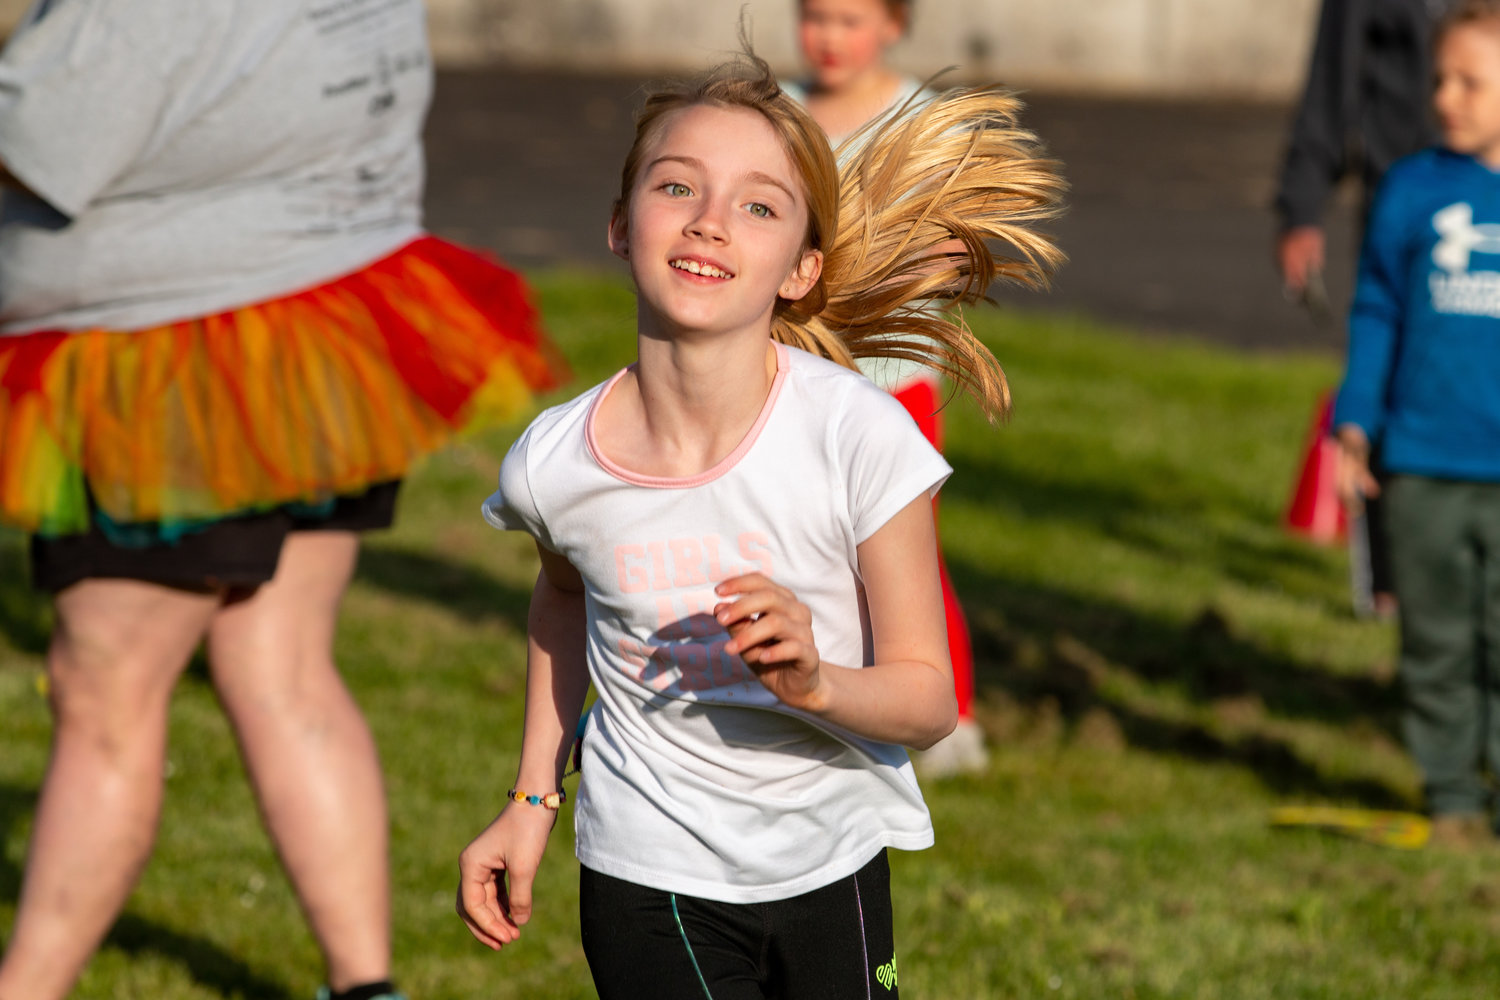 Alison runs to claim her prize during the cake walk at Kelli’s Kids Kamp held at the Relay for Life event at the Southwest Washington Fairgrounds Friday evening.